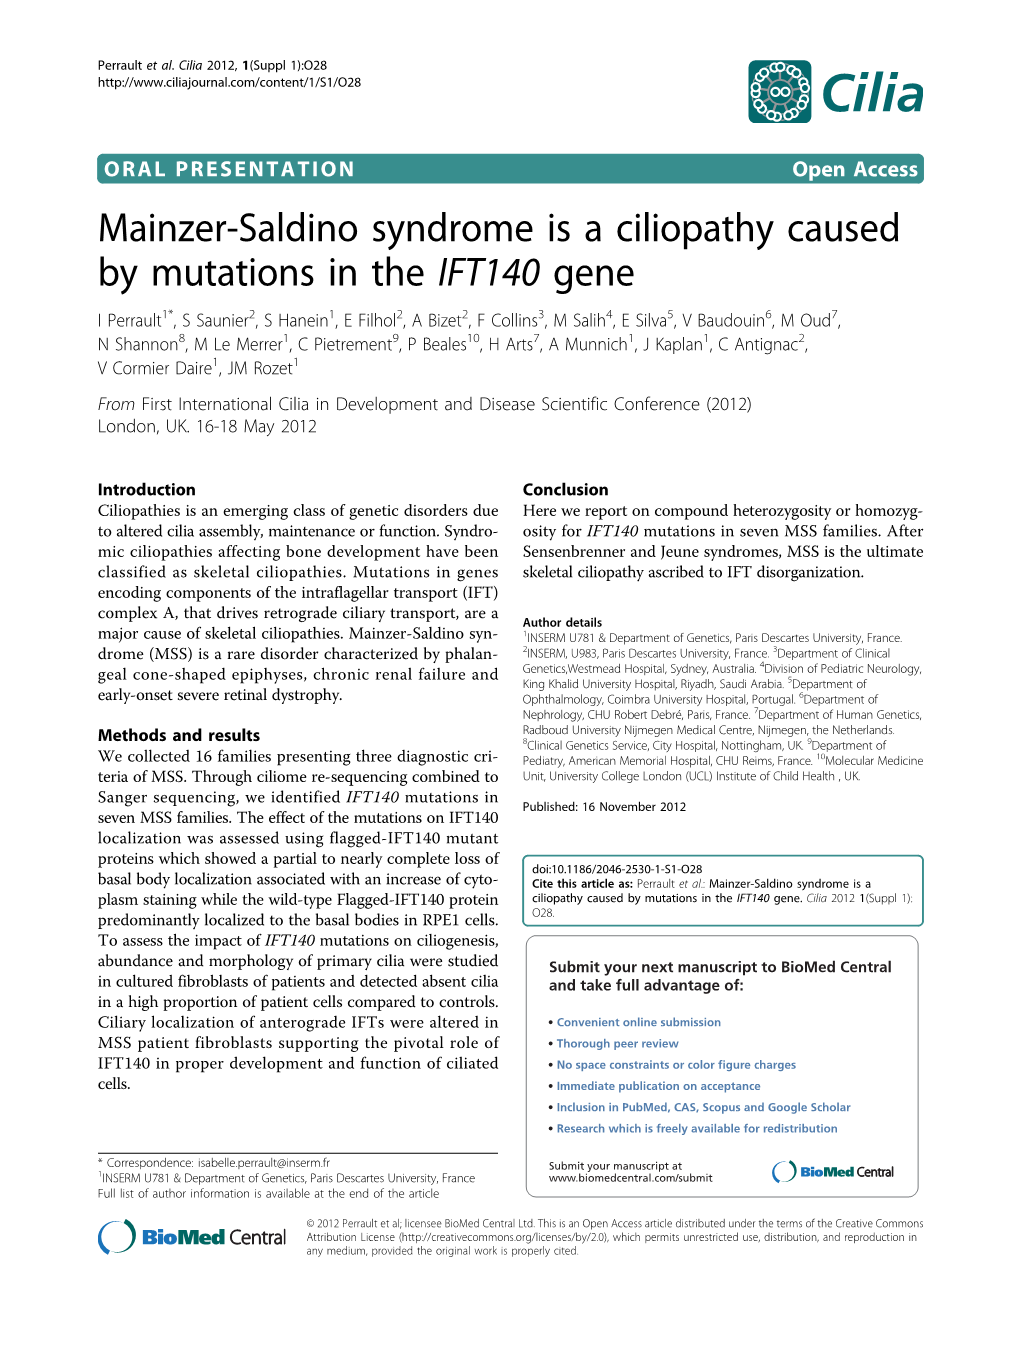 Mainzer-Saldino Syndrome Is a Ciliopathy Caused by Mutations In